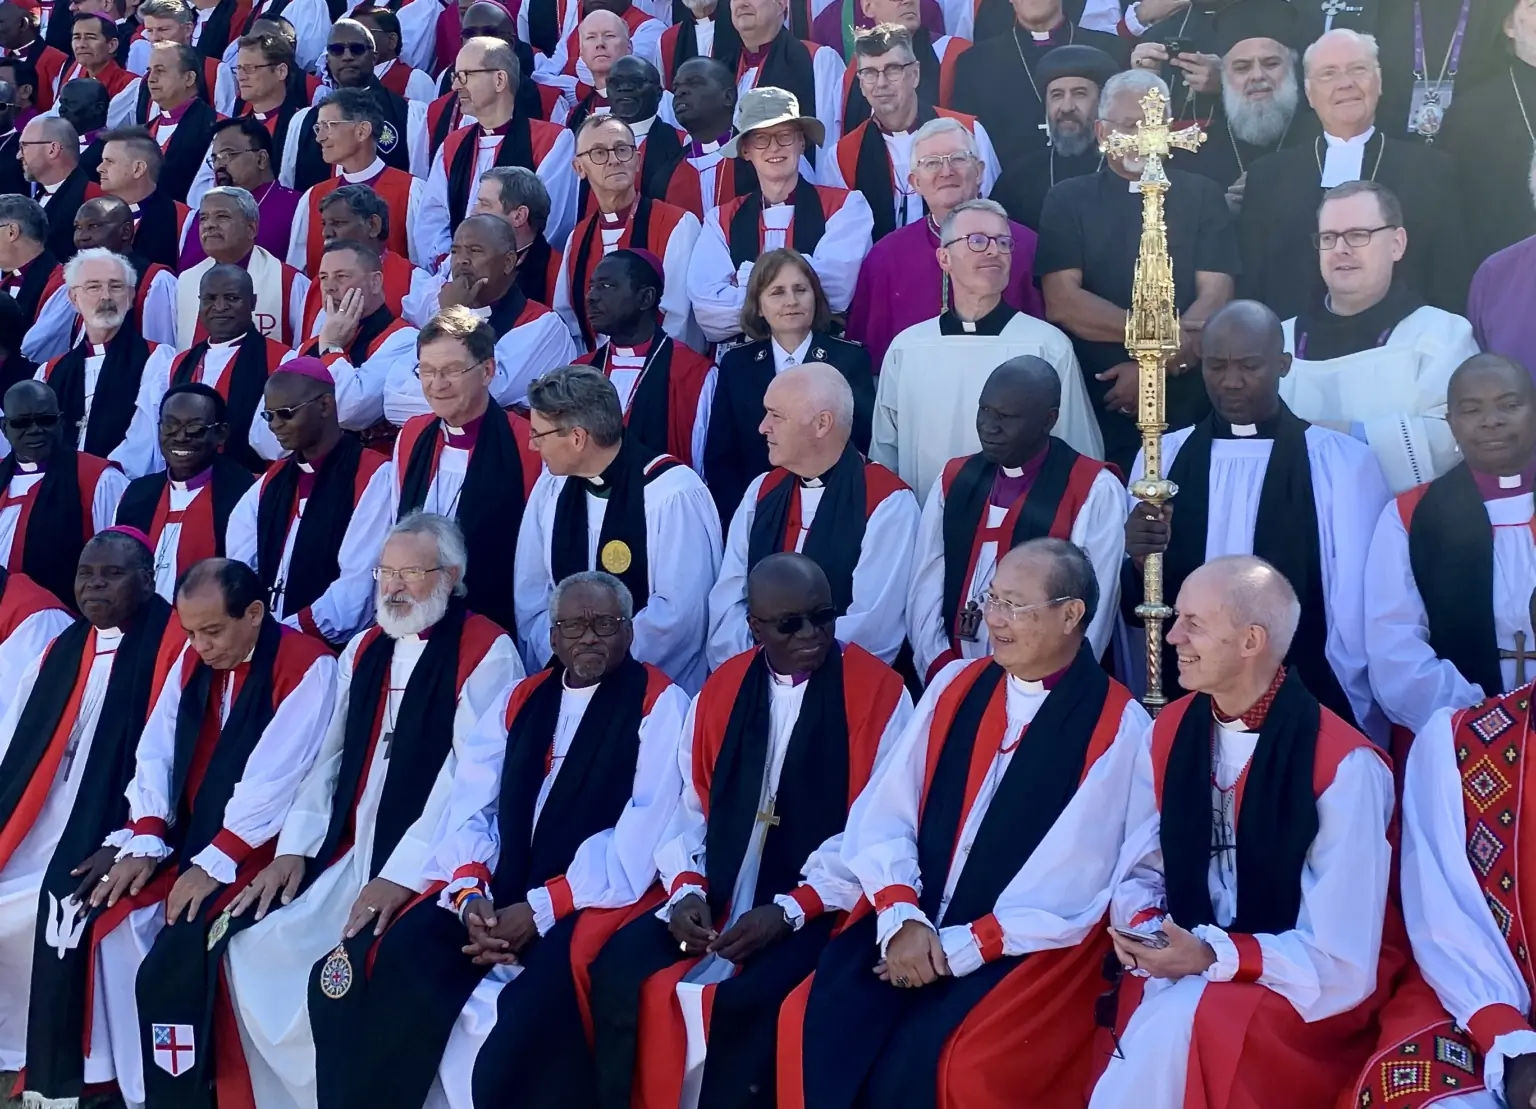 Anglican bishops and ecumenical guests pose for their portrait at the 15th Lambeth Conference